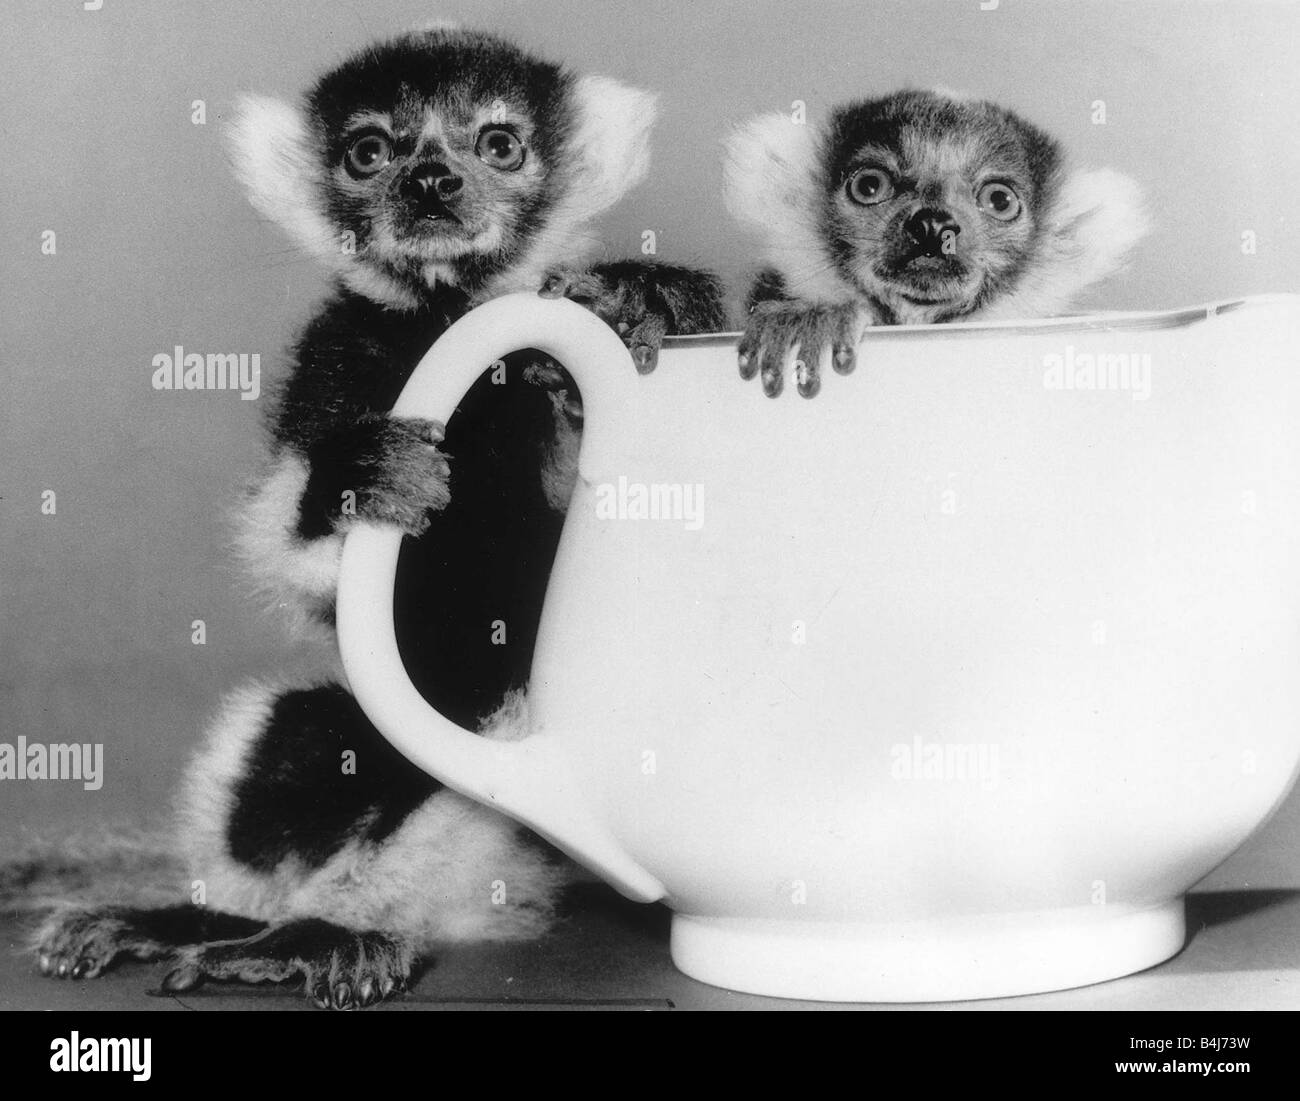 Animals Lemurs Two week old Ruffled Lemursstand behind a tea pot at Howletts Zoo in Kent where they are being hand reared Stock Photo